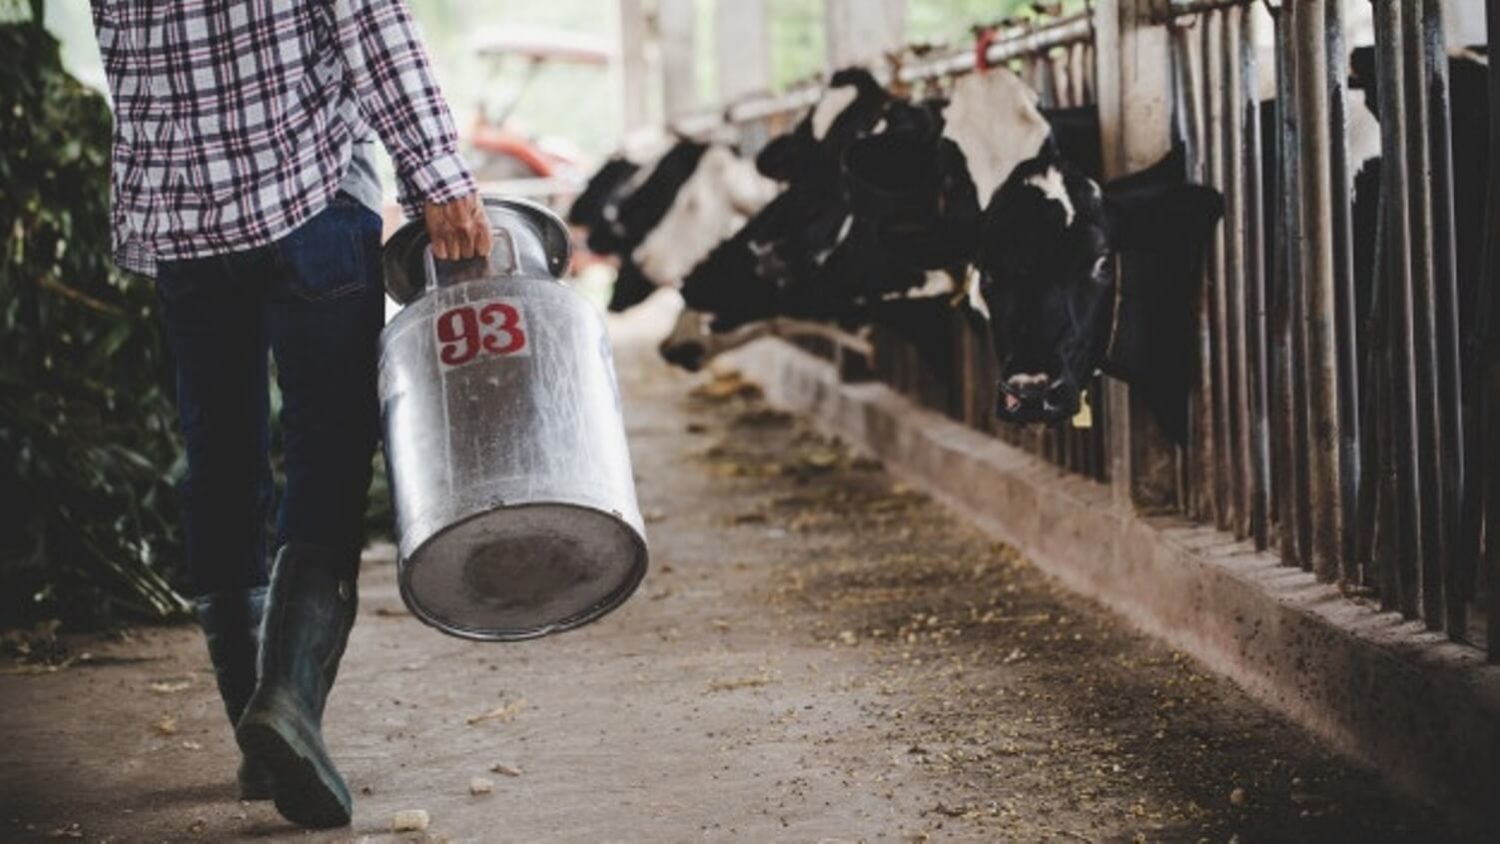 Suppliers Dump Milk and Eggs As Demand Drops During COVID19